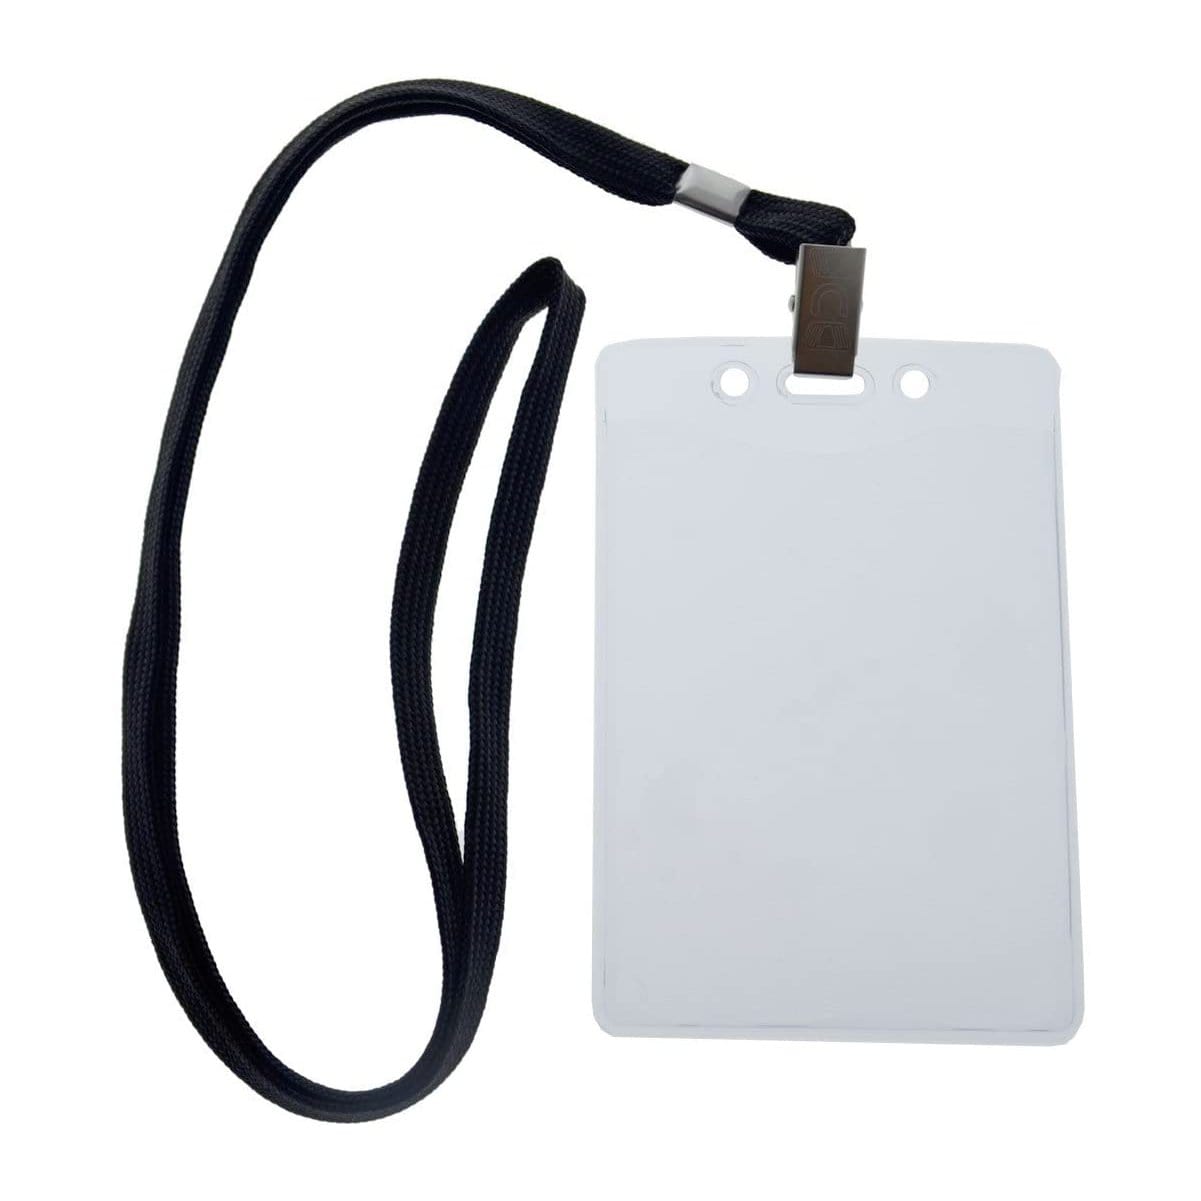 Heavy Duty 3 x 4 Name Badge Holder - 3x4 Vertical Textured Convention Conference Card Protector (p/n 1815-1450)